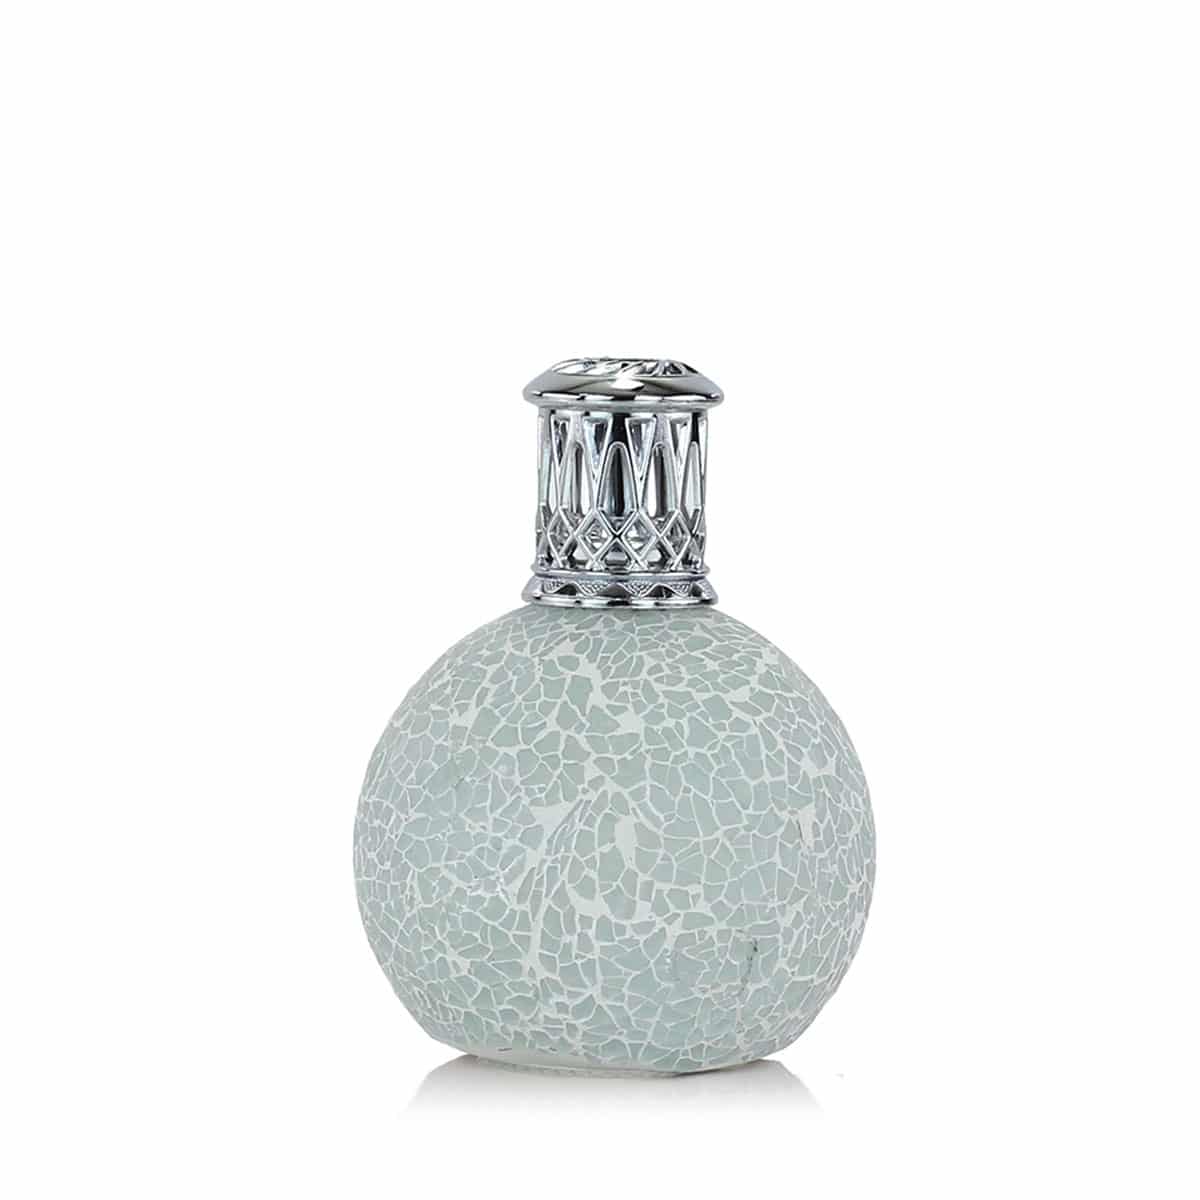 Frozen in Time Small Mosaic Fragrance Lamp